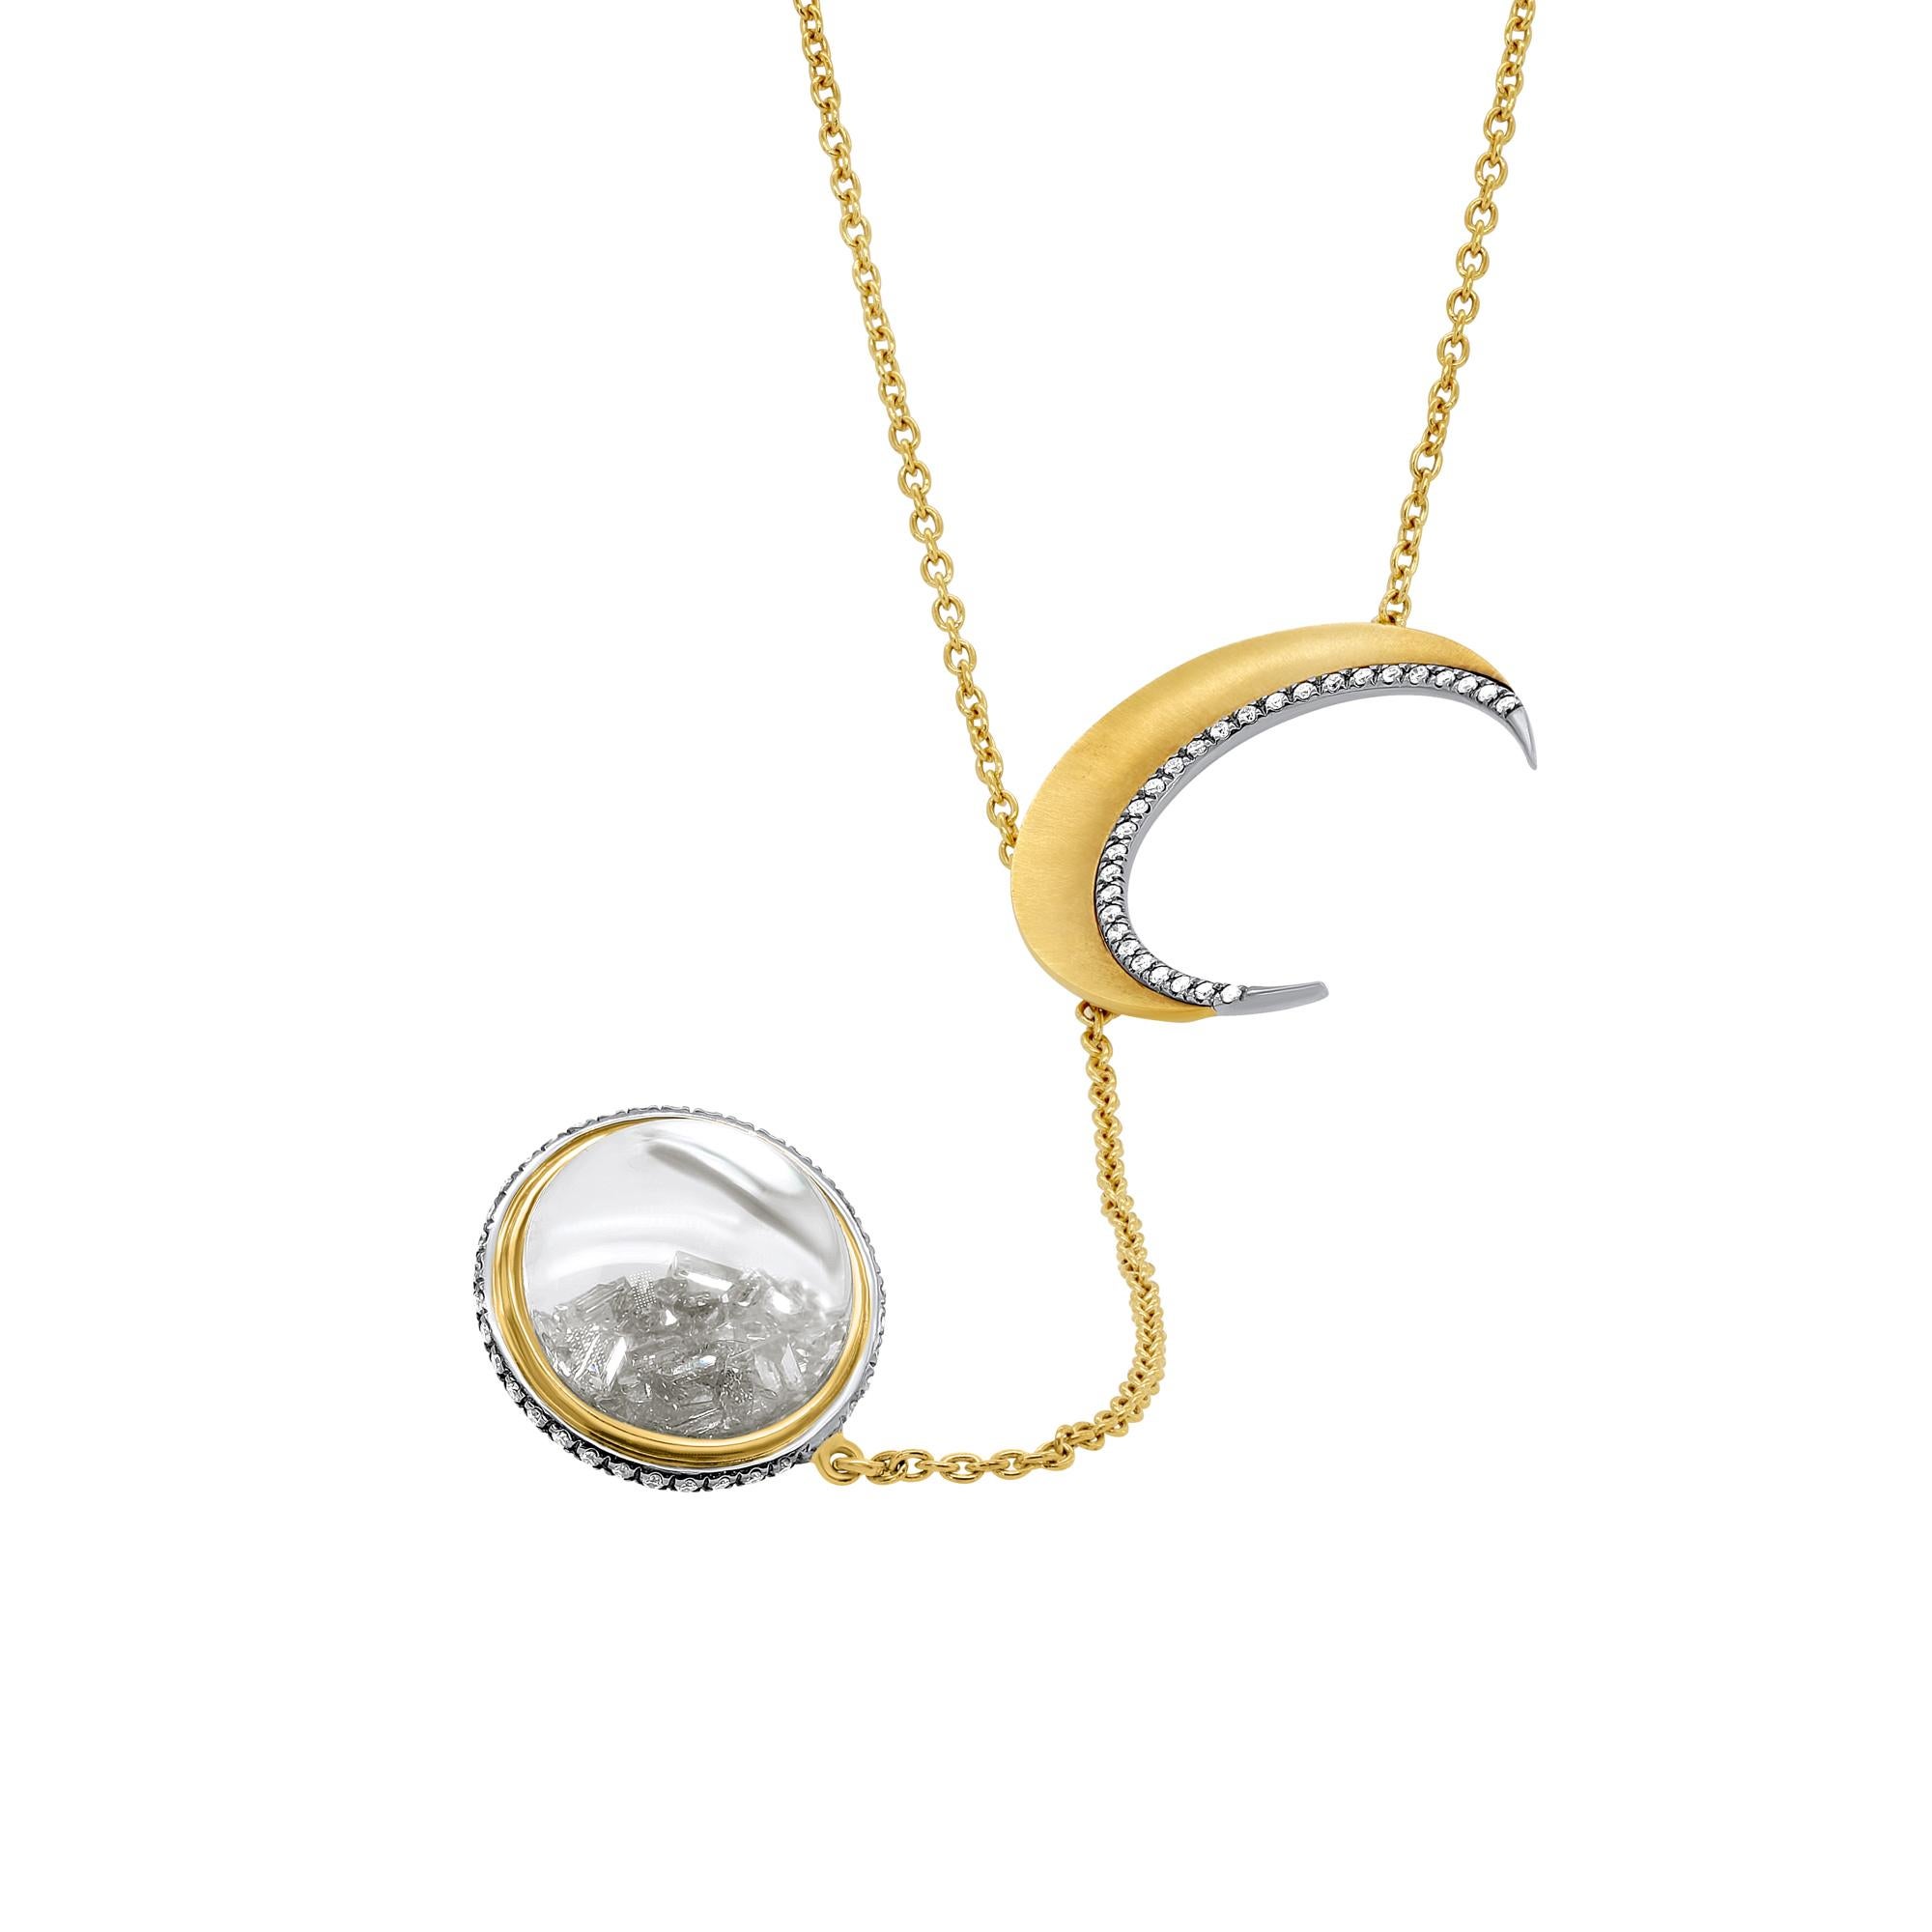 Moritz Glik 18k Yellow Gold Diamond Double Case Half Moon Shaker Necklace 
Set with Mixed cut diamonds; estimated total weight is 1.92ctw.
The Sapphire Case pendant’s measures to 17.91mm in diameter; crescent moon’ measurements are